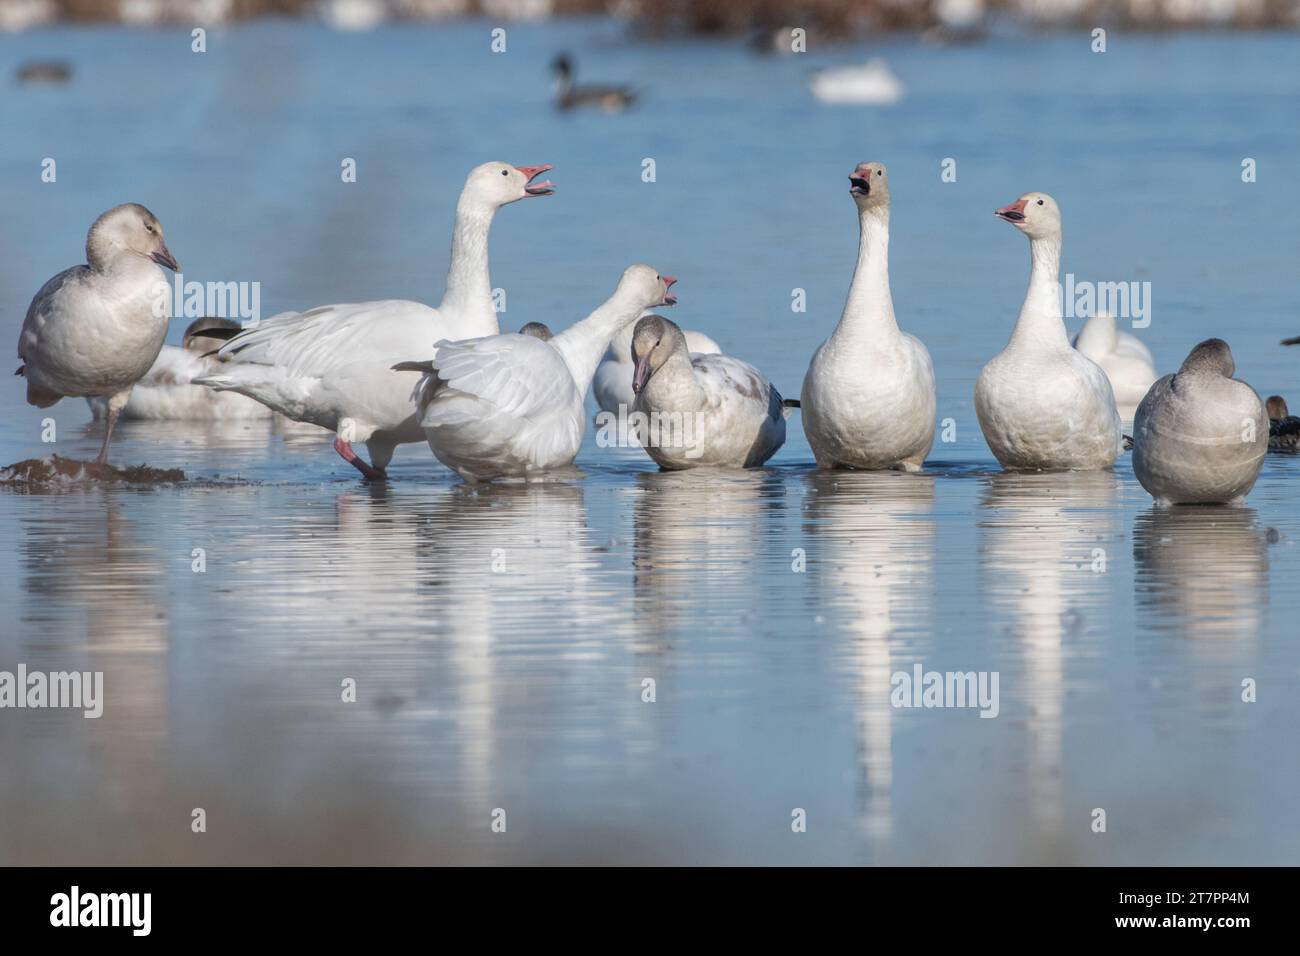 A group of snow geese, Anser caerulescens, communicating in a shallow marsh in Sacramento Wildlife Refuge in California, USA. Stock Photo